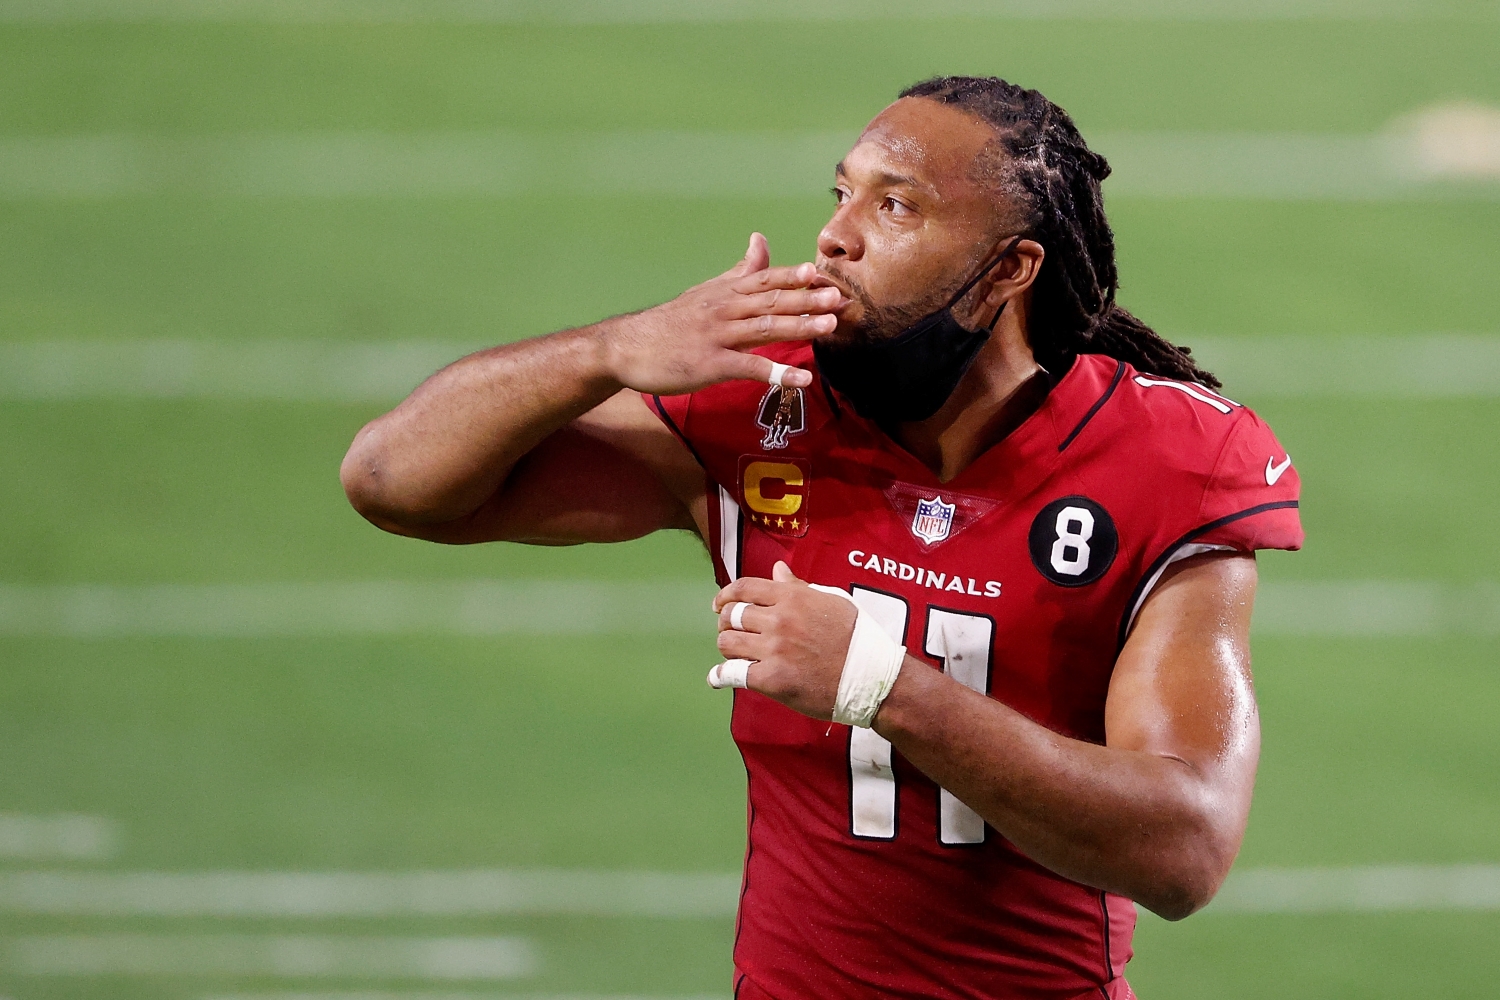 Arizona Cardinals wide receiver Larry Fitzgerald says goodbye to fans after a game against the San Francisco 49ers.